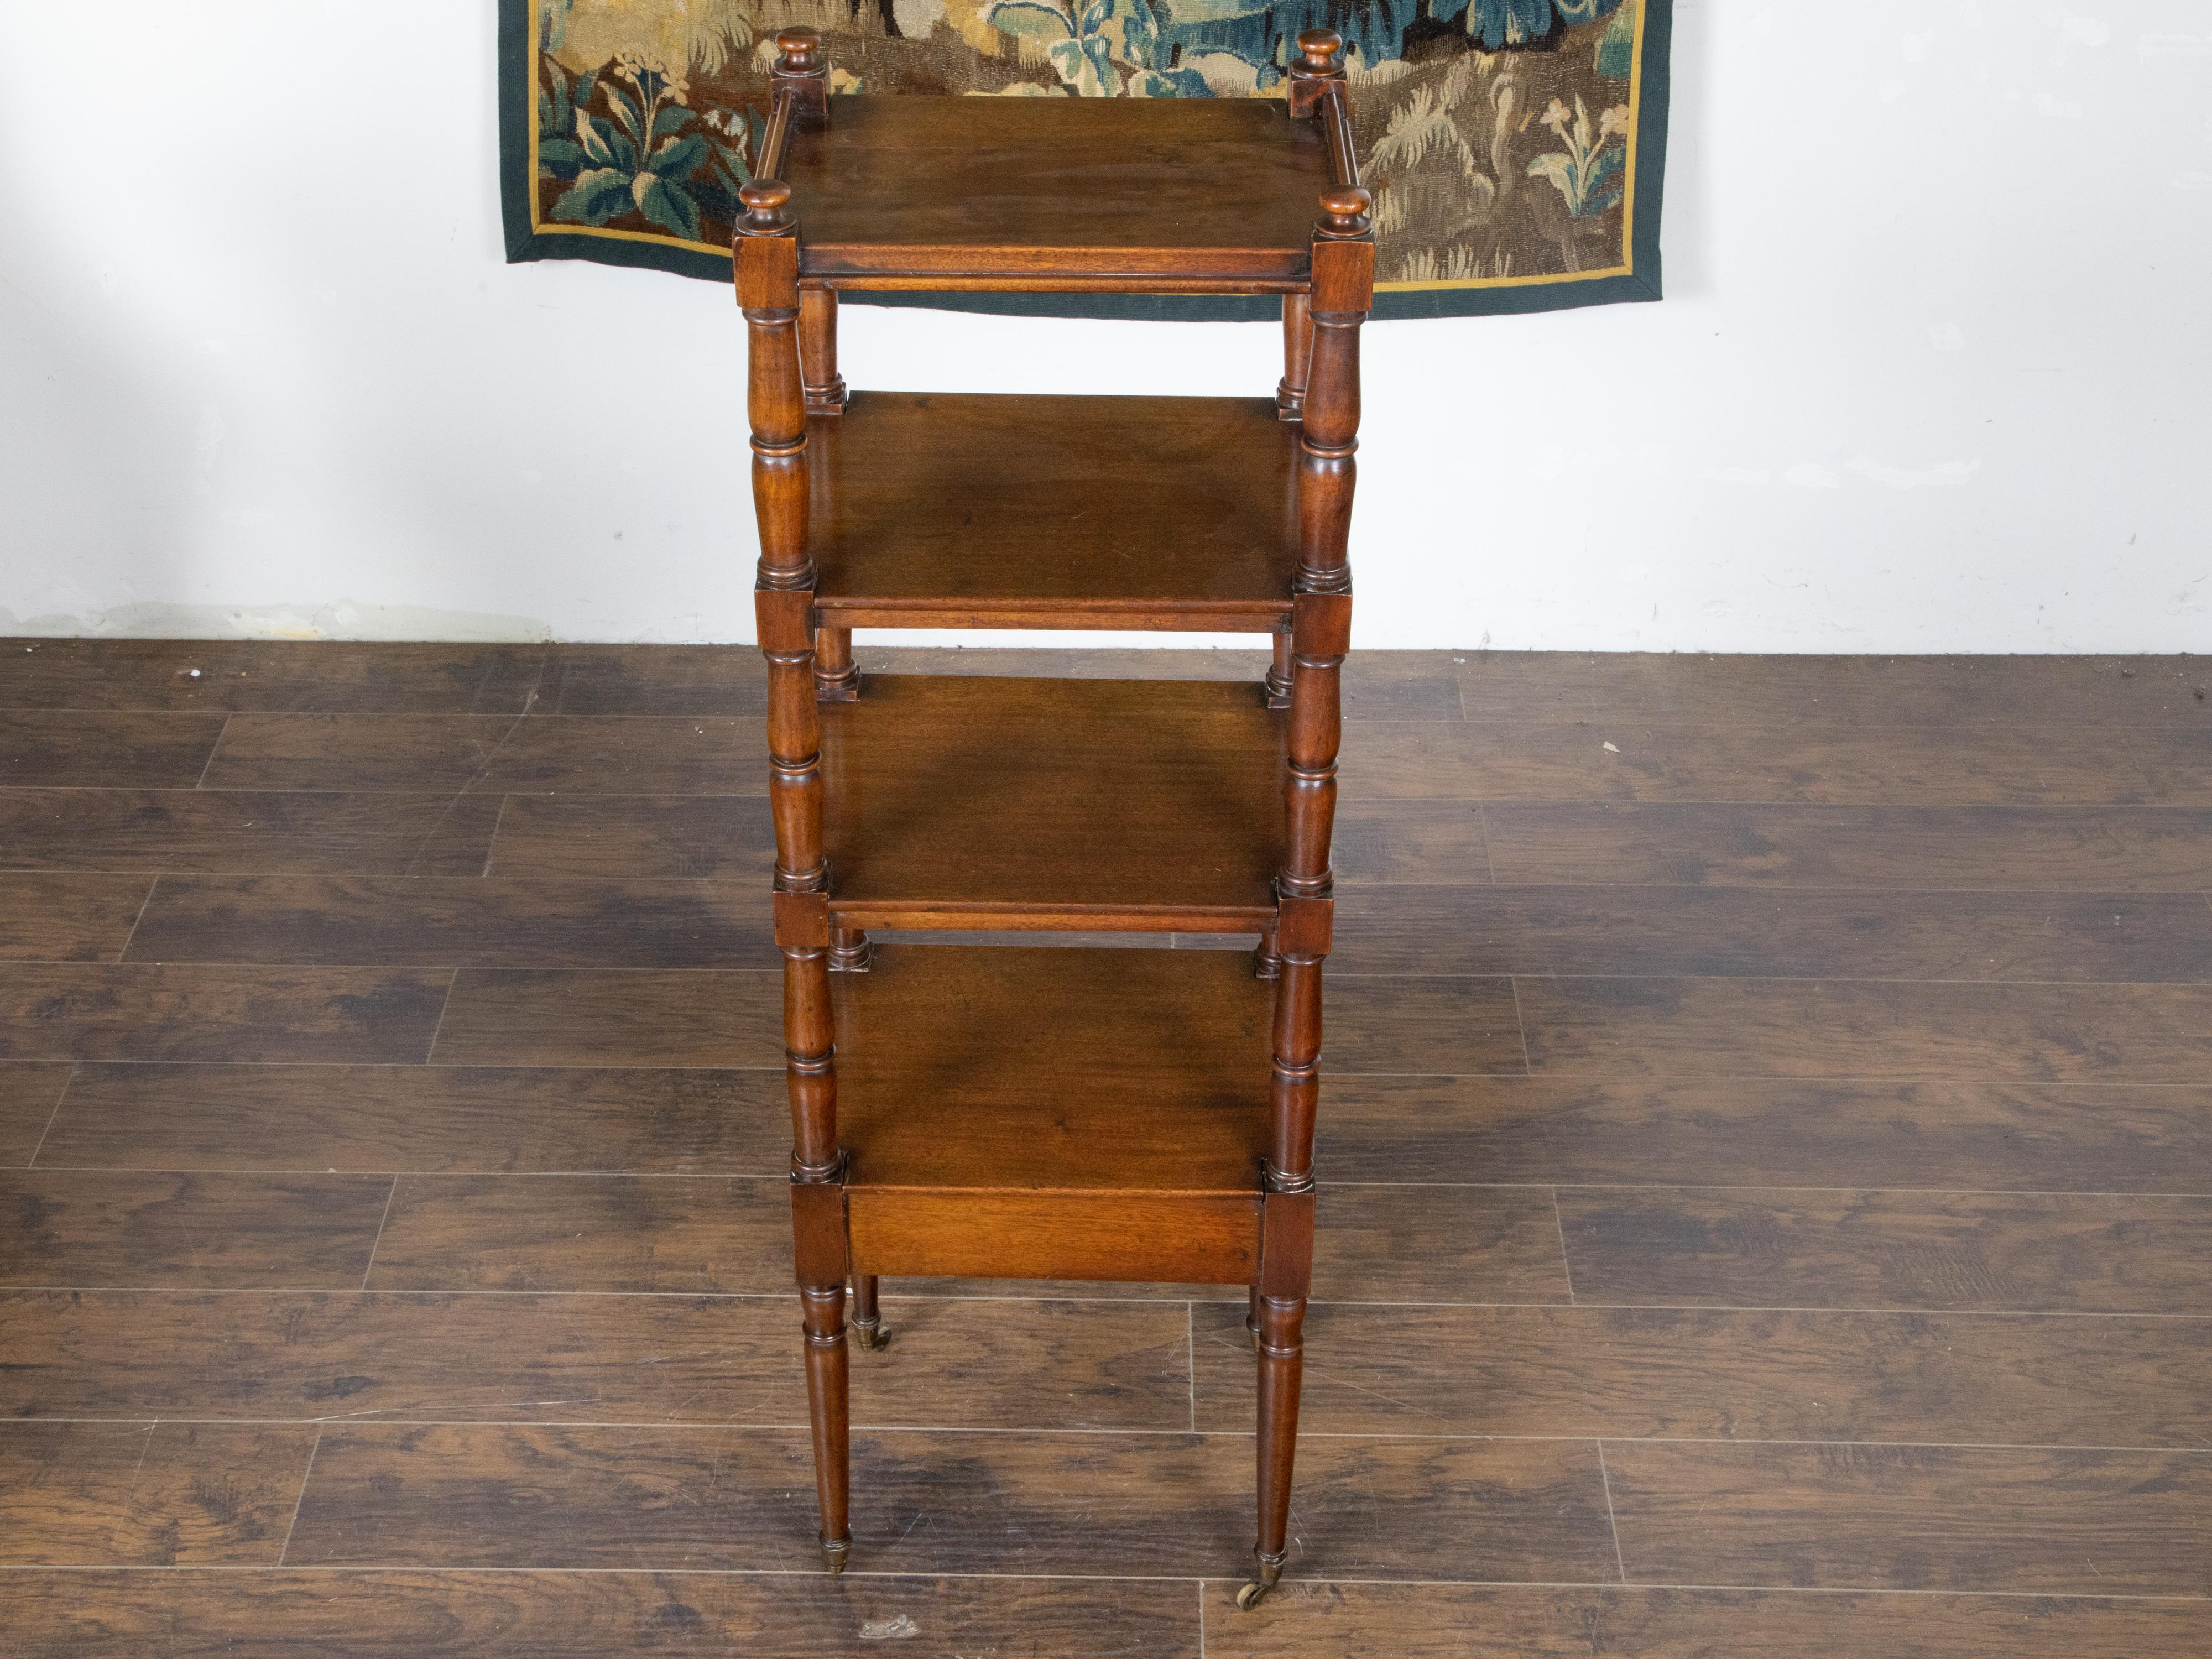 19th Century English 1840s Mahogany Four-Tiered Trolley with Turned Side Posts and Casters